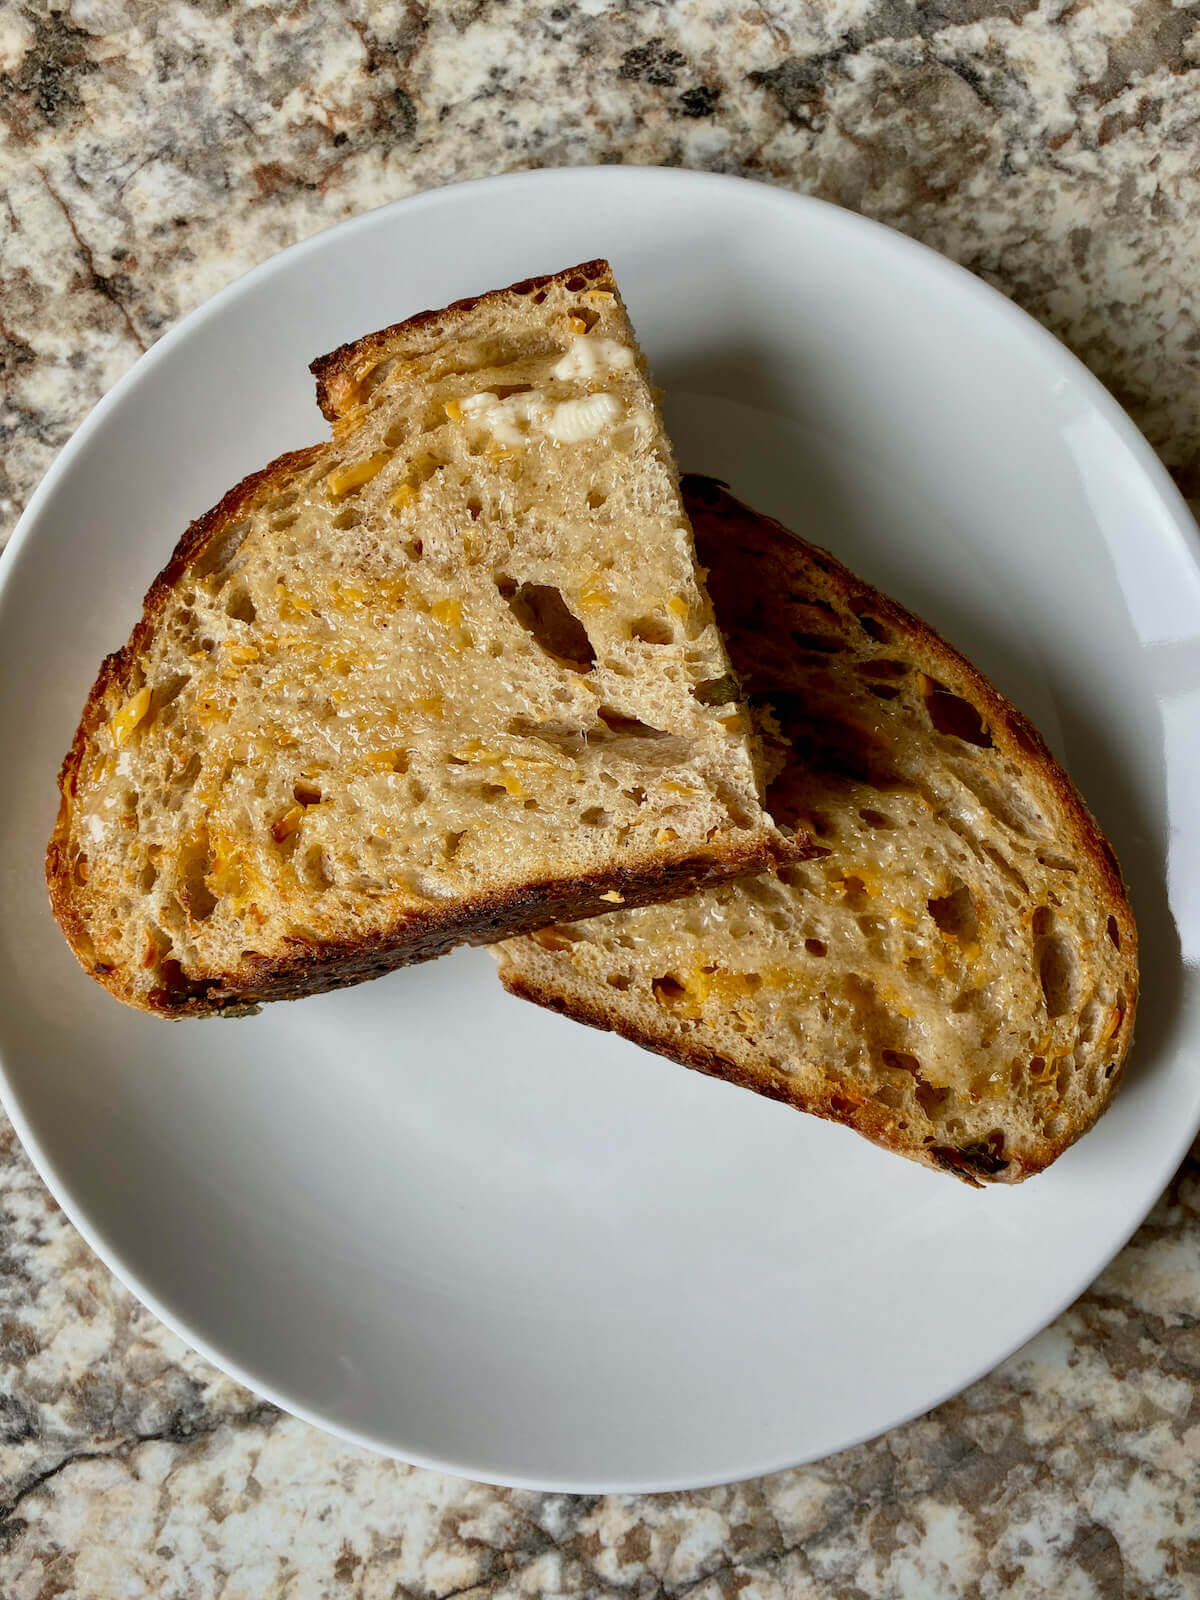 A piece of buttered sourdough toast cut in half on a small white plate.